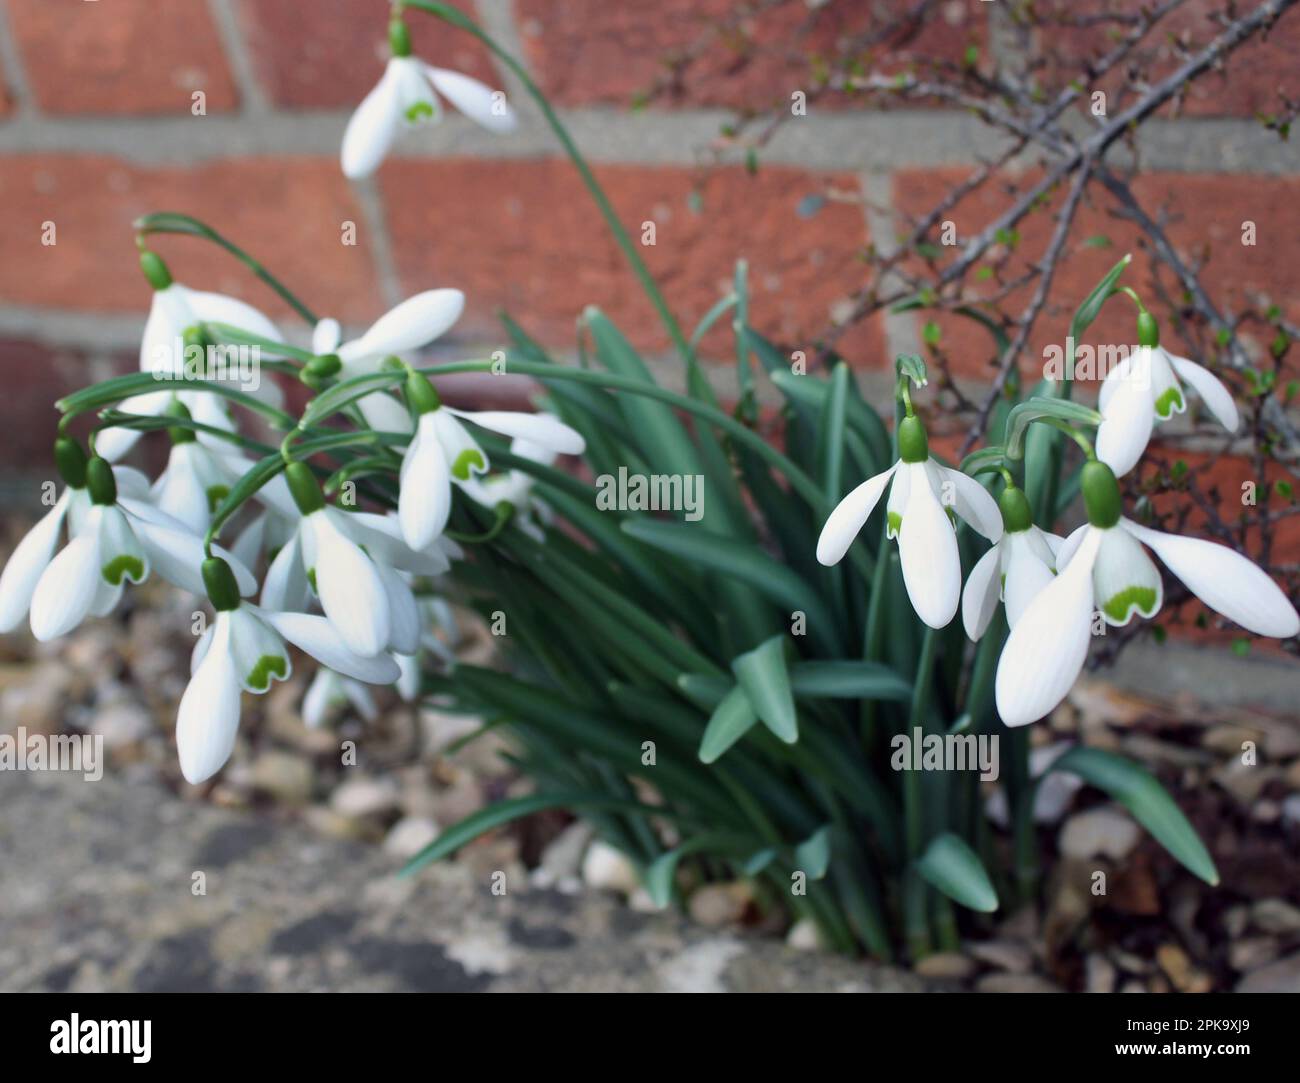 Snowdrops (Galanthus nivalis) flowers of hope in late winter Stock Photo